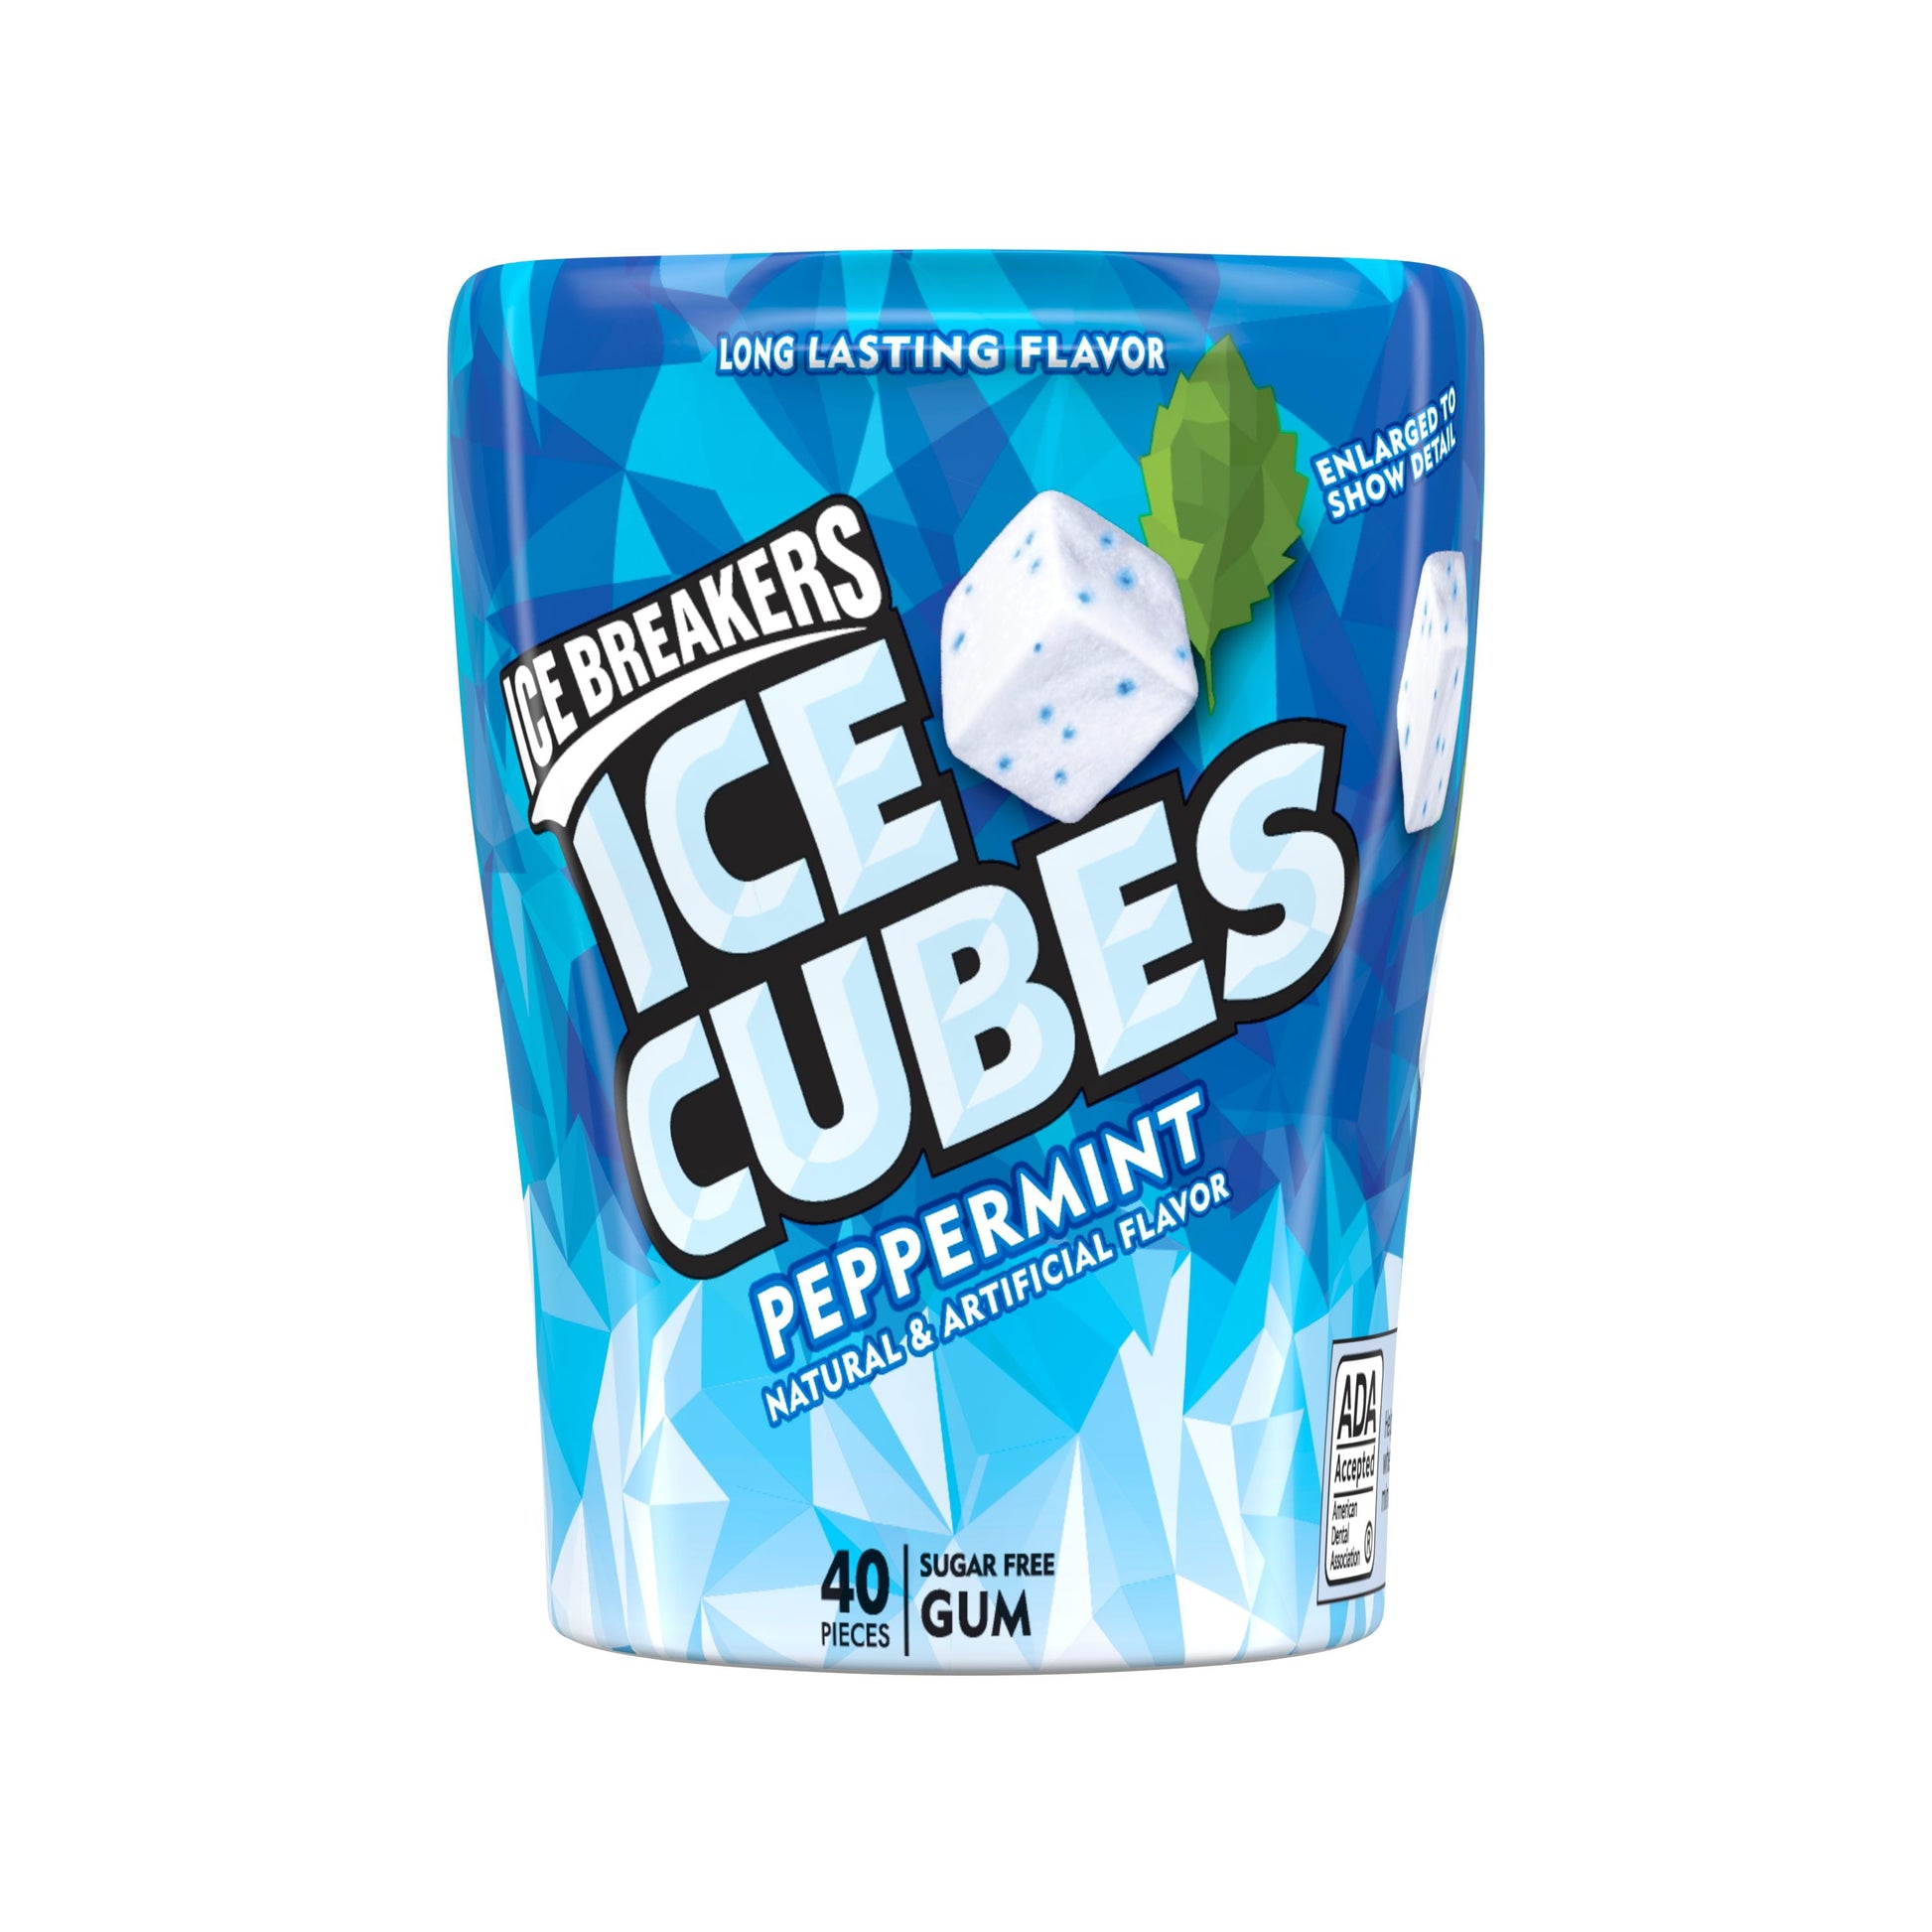 , ICE CUBES, Peppermint Flavored Sugar Free Chewing Gum, Made with Xylitol, 40 Piece, Container, 4 Ct.